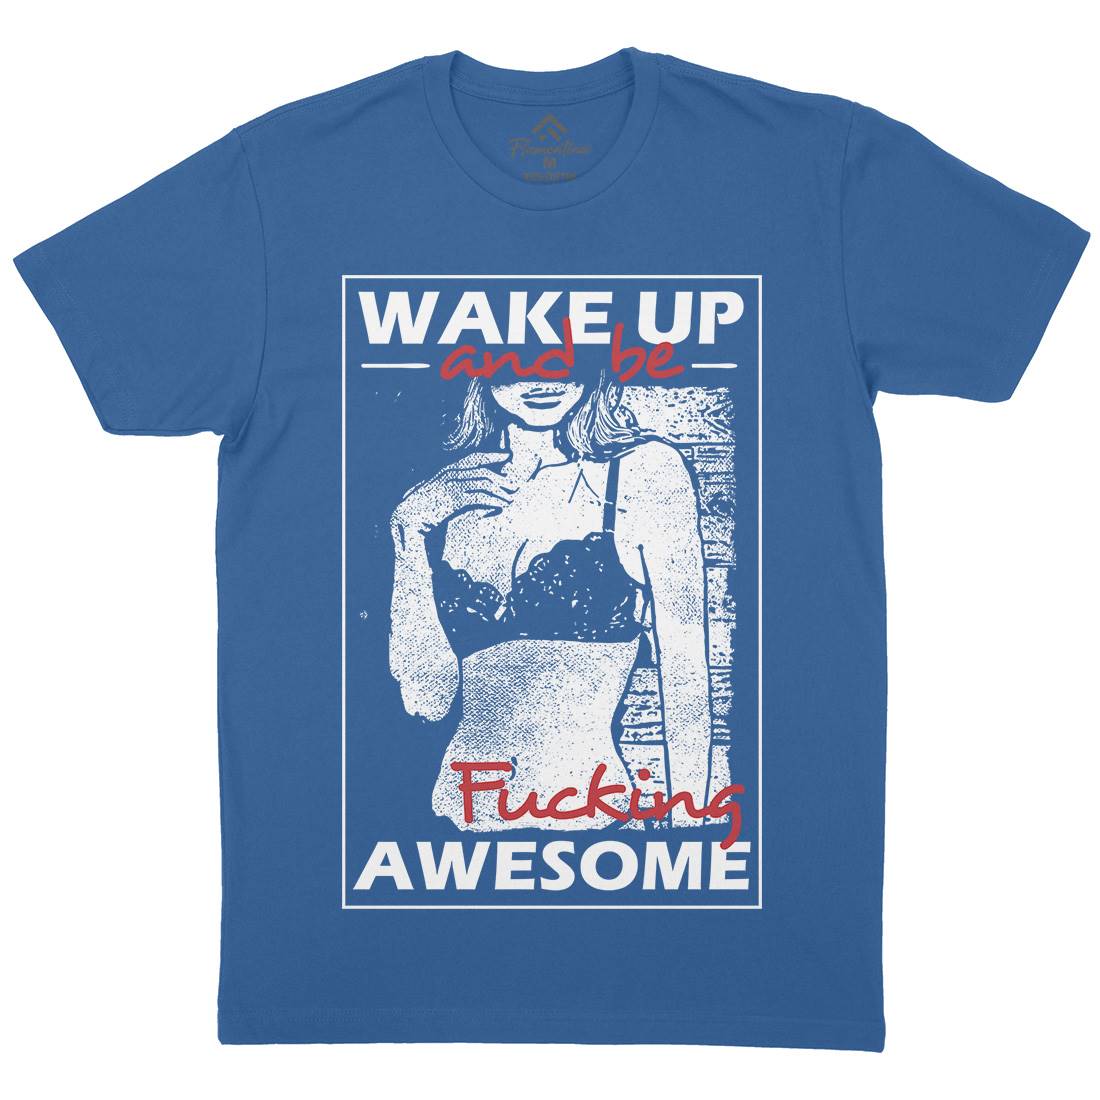 Wake Up And Be Awesome Mens Crew Neck T-Shirt Gym C993